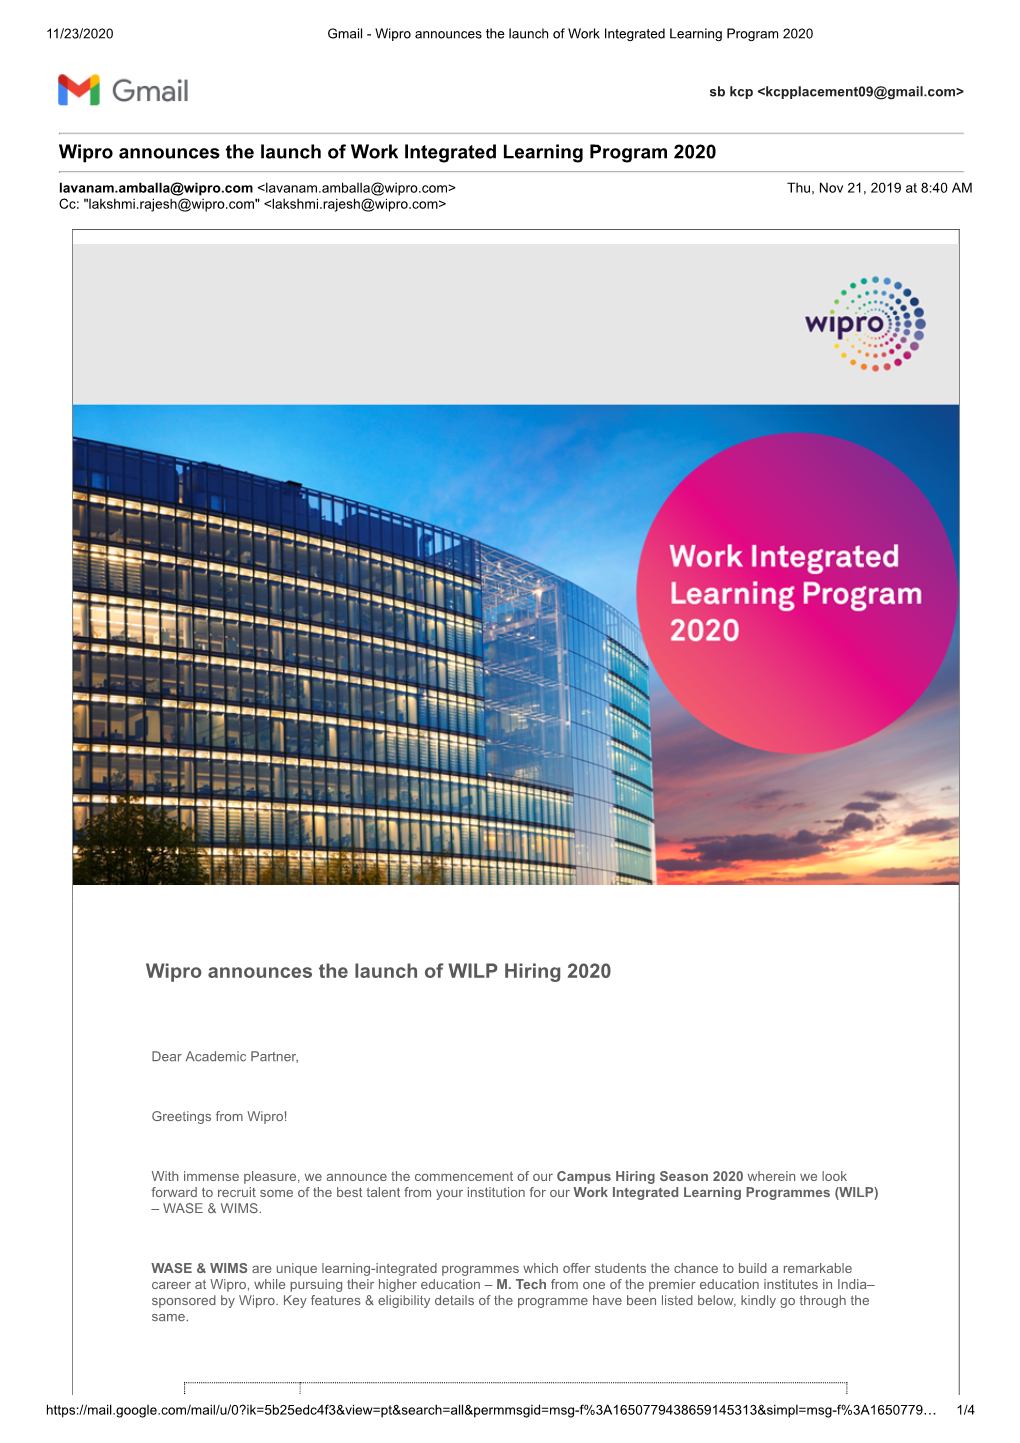 Wipro Announces the Launch of WILP Hiring 2020